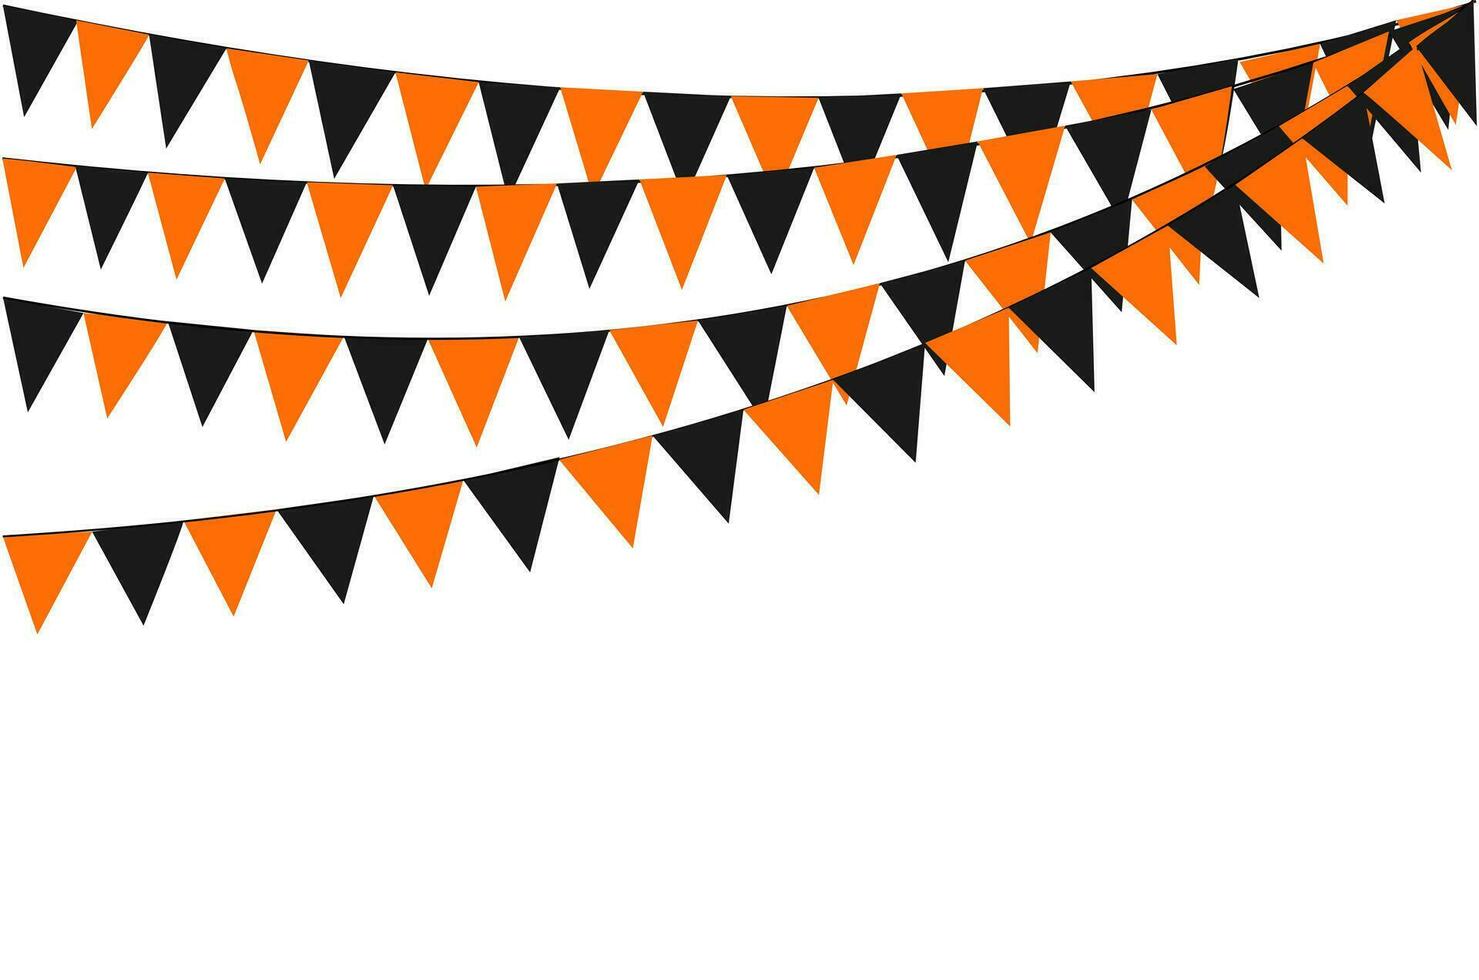 Bunting Hanging Orange Black Flags Triangles Banner Background. Halloween, Trick, Treat, Night, Harvesting, Autumn, Thanksgiving, Goust, Pumpkin, party, celebration concepts. vector